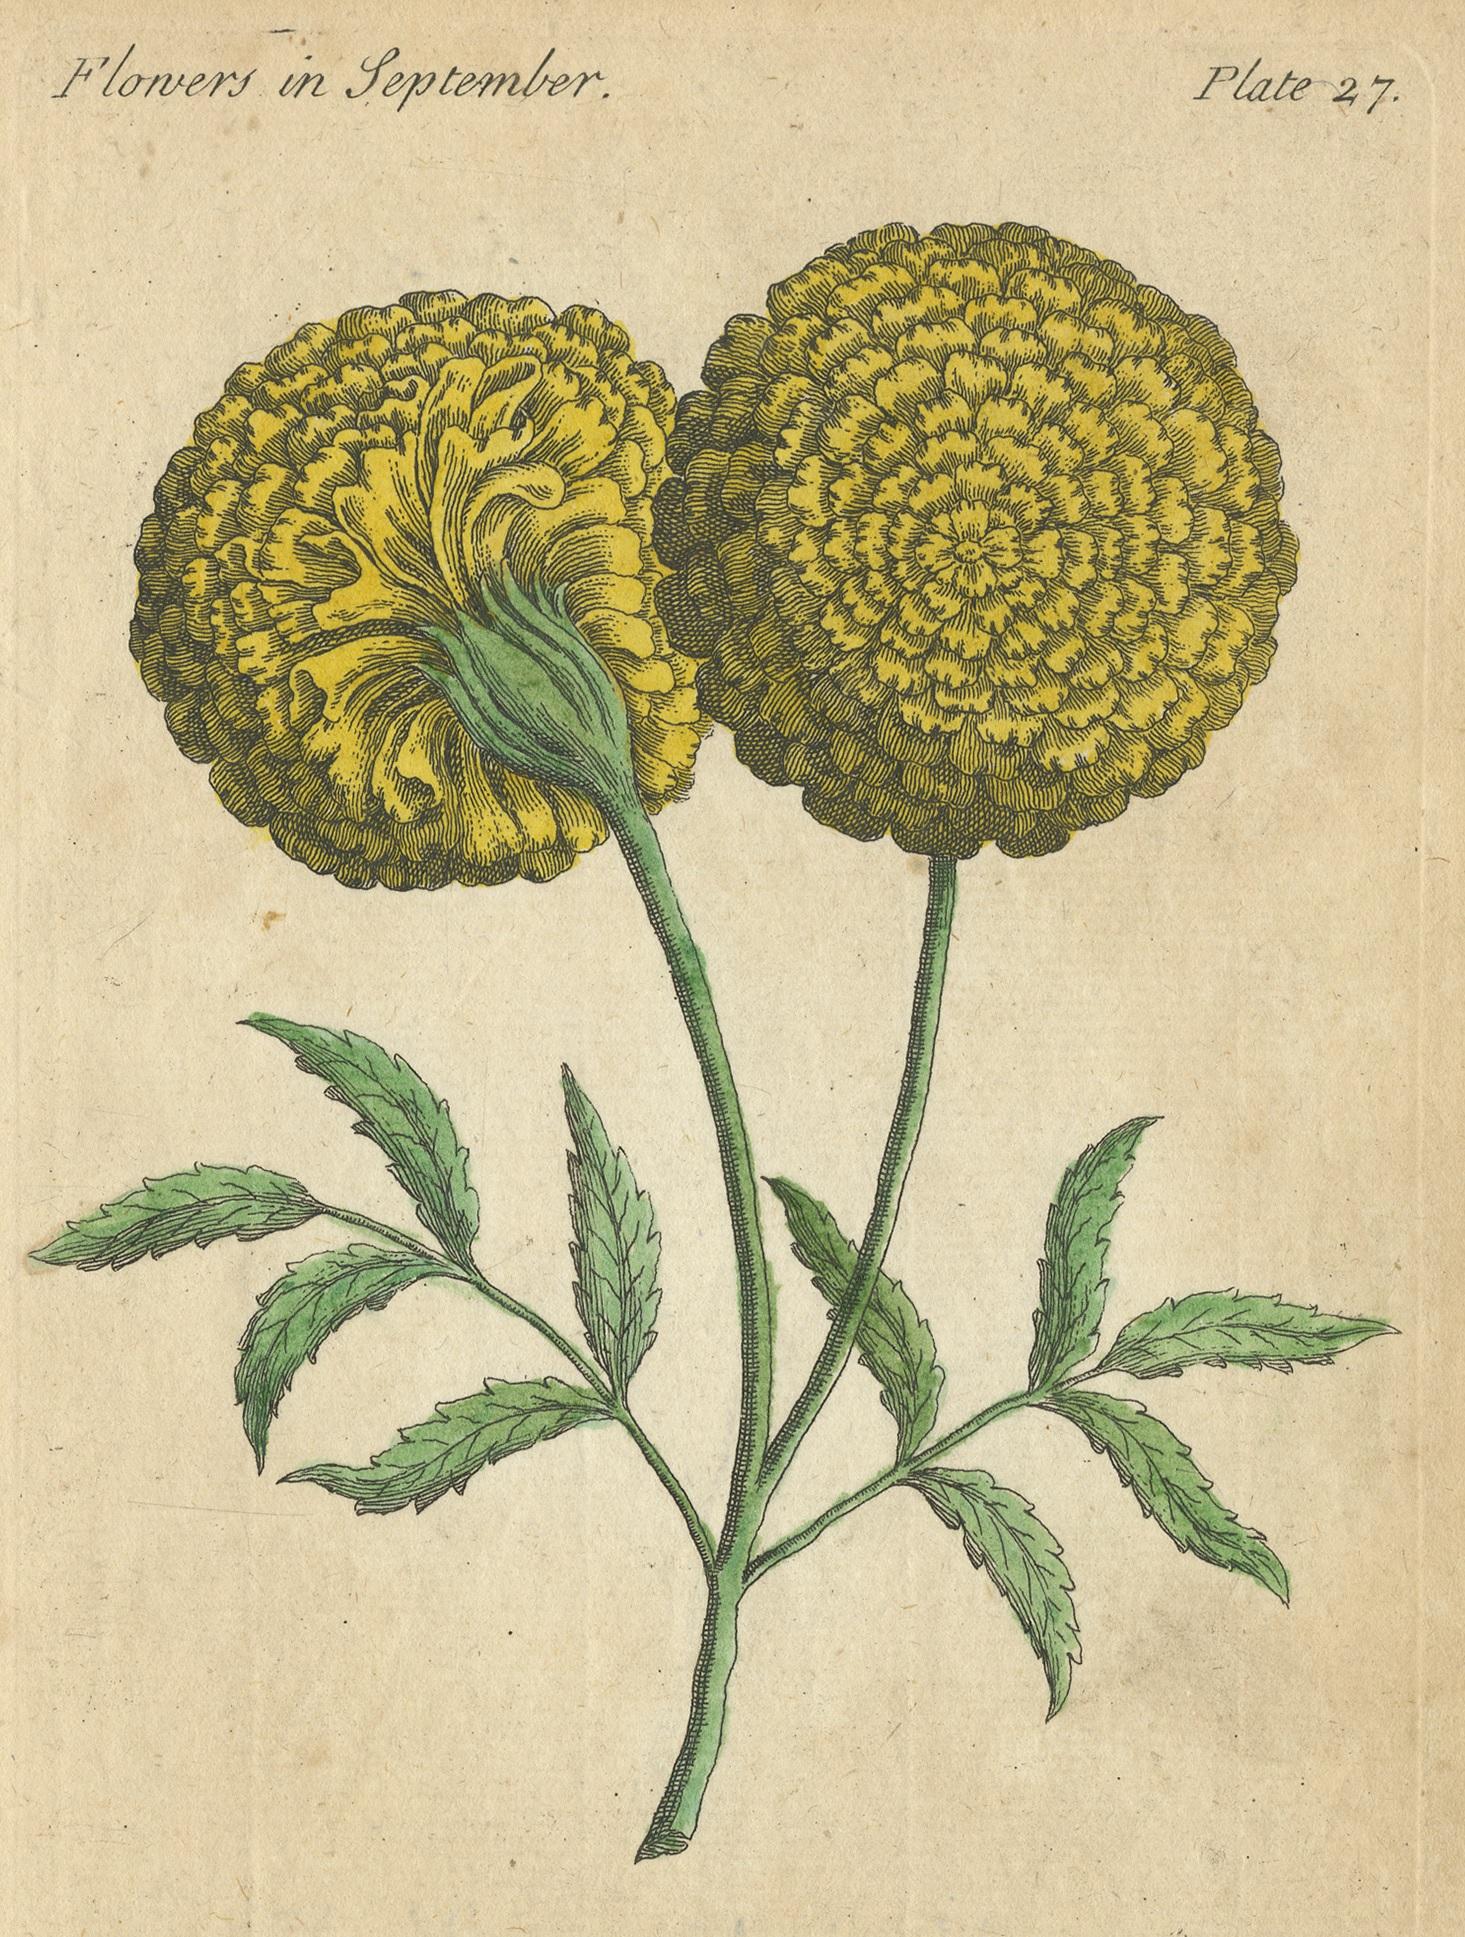 Antique botany print titled 'The African Marigold'. This print originates from 'The Compleat Florist' by J. Duke.